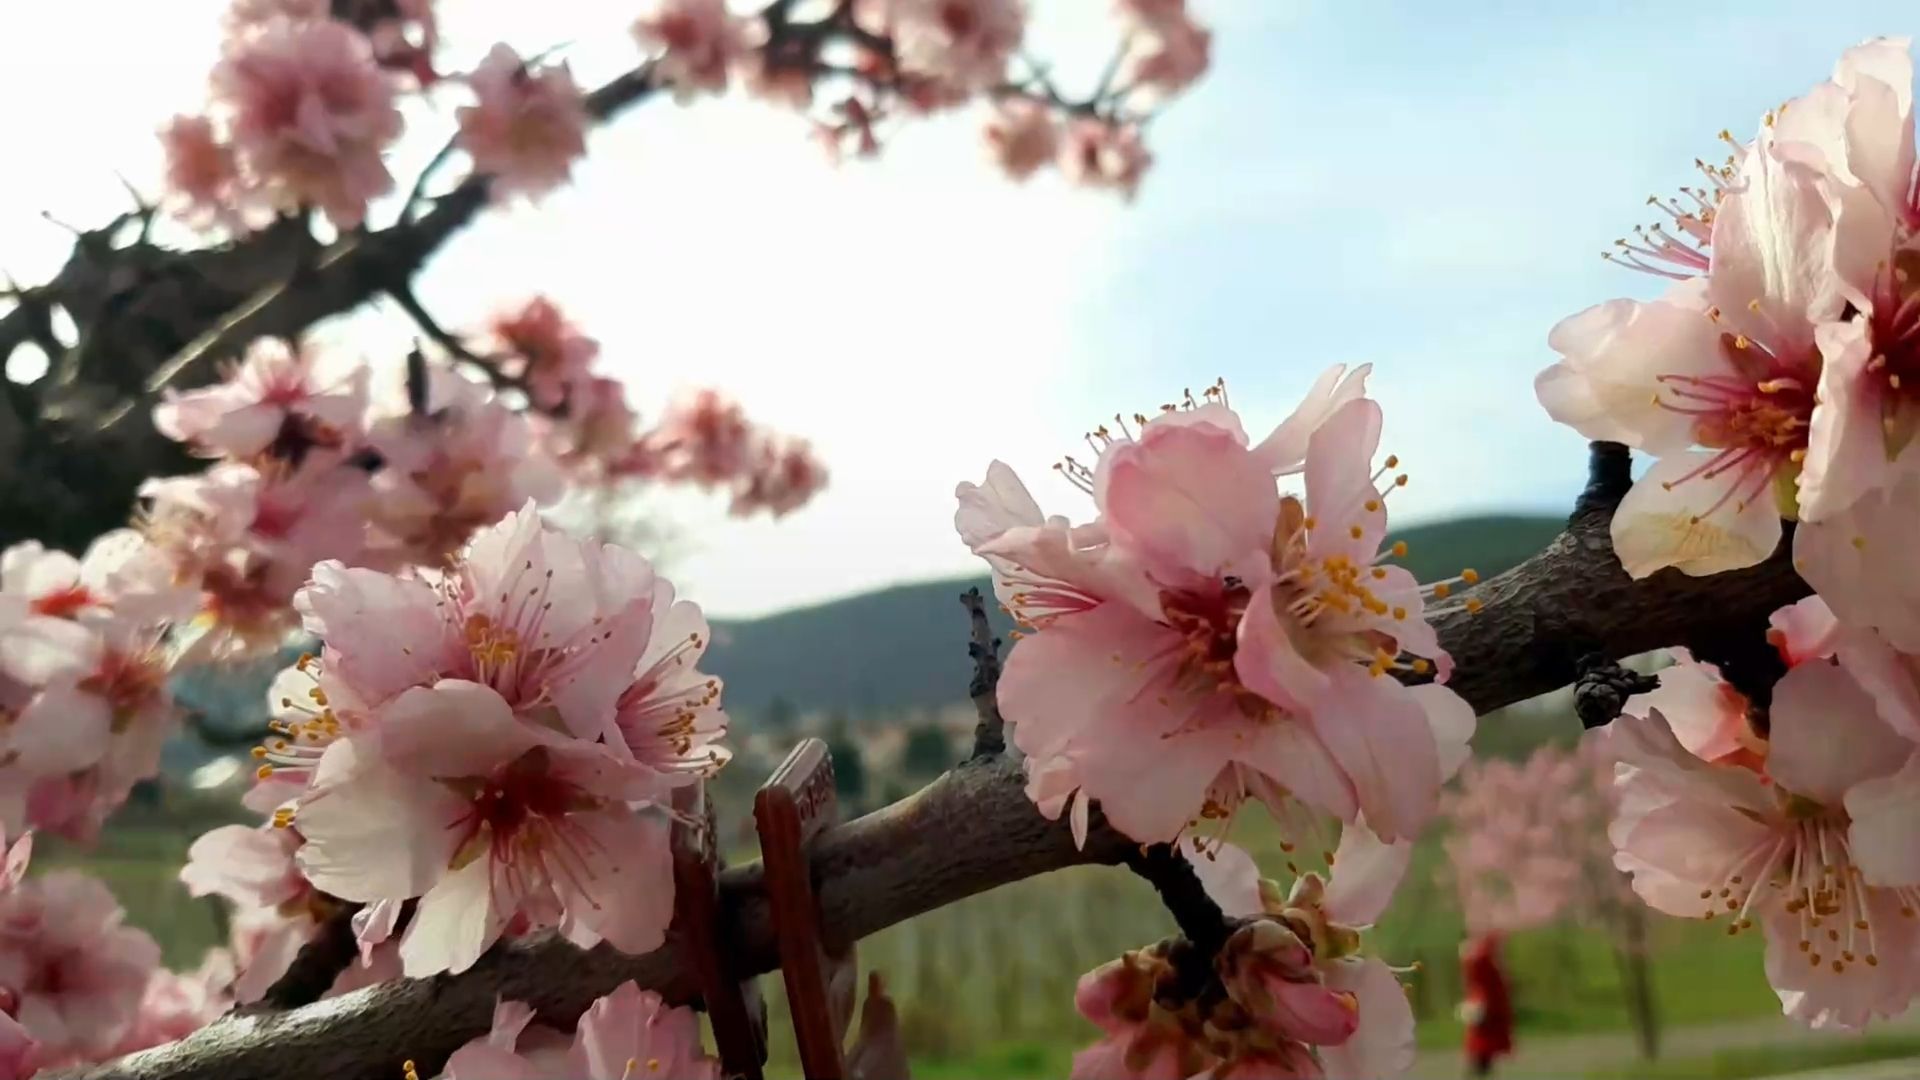 Almond blossom festival in Gimmeldingen: Pale pink blossoms enchant thousands of visitors every year